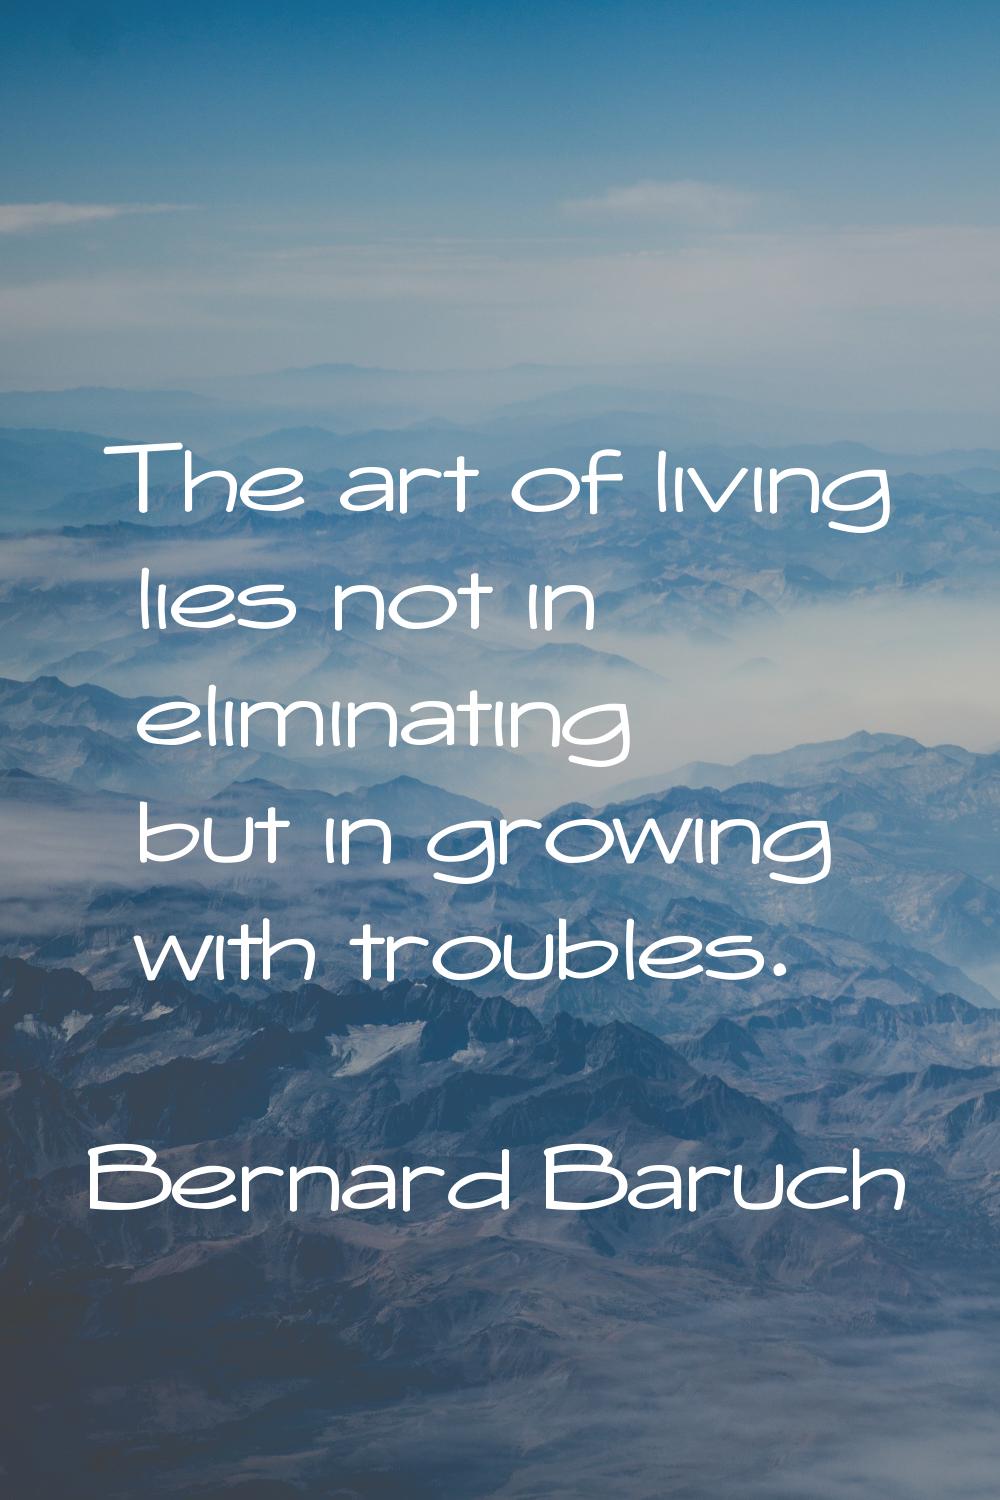 The art of living lies not in eliminating but in growing with troubles.